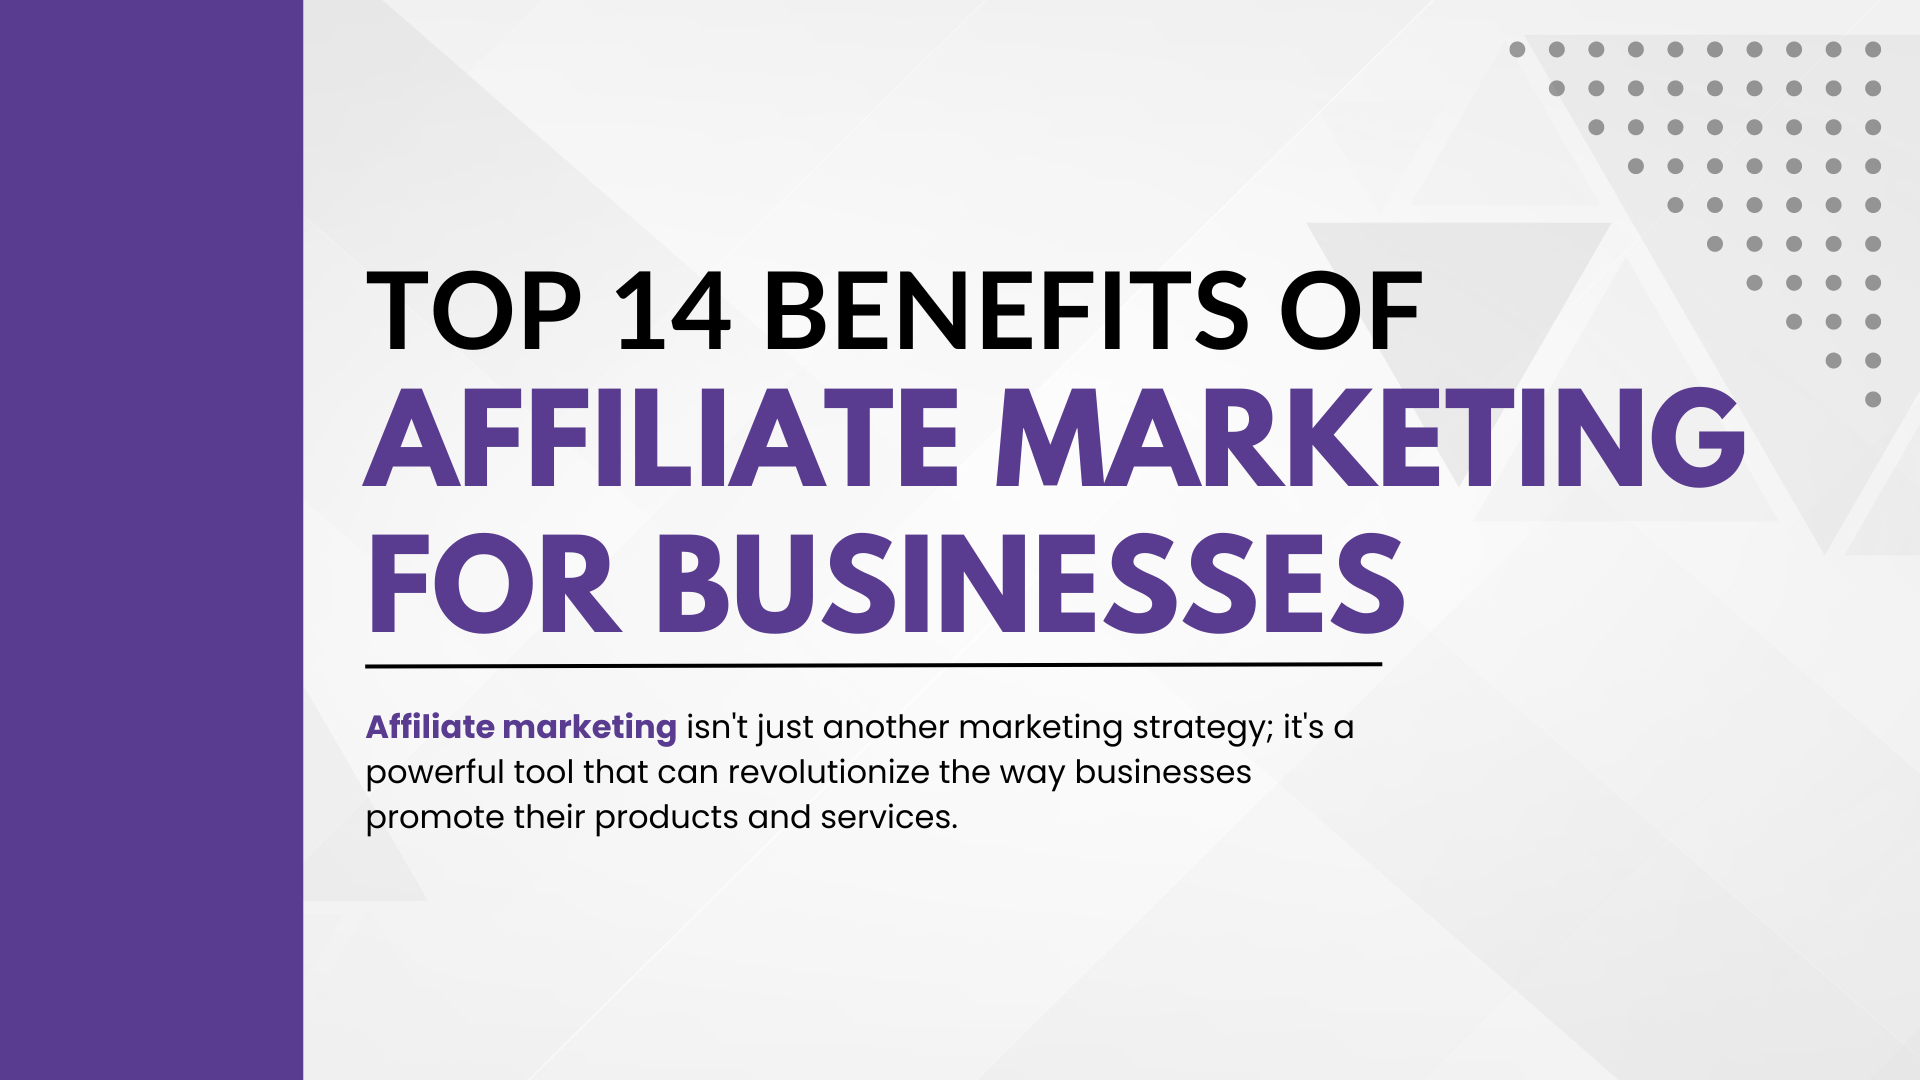 Top 14 Benefits of Affiliate Marketing for Businesses